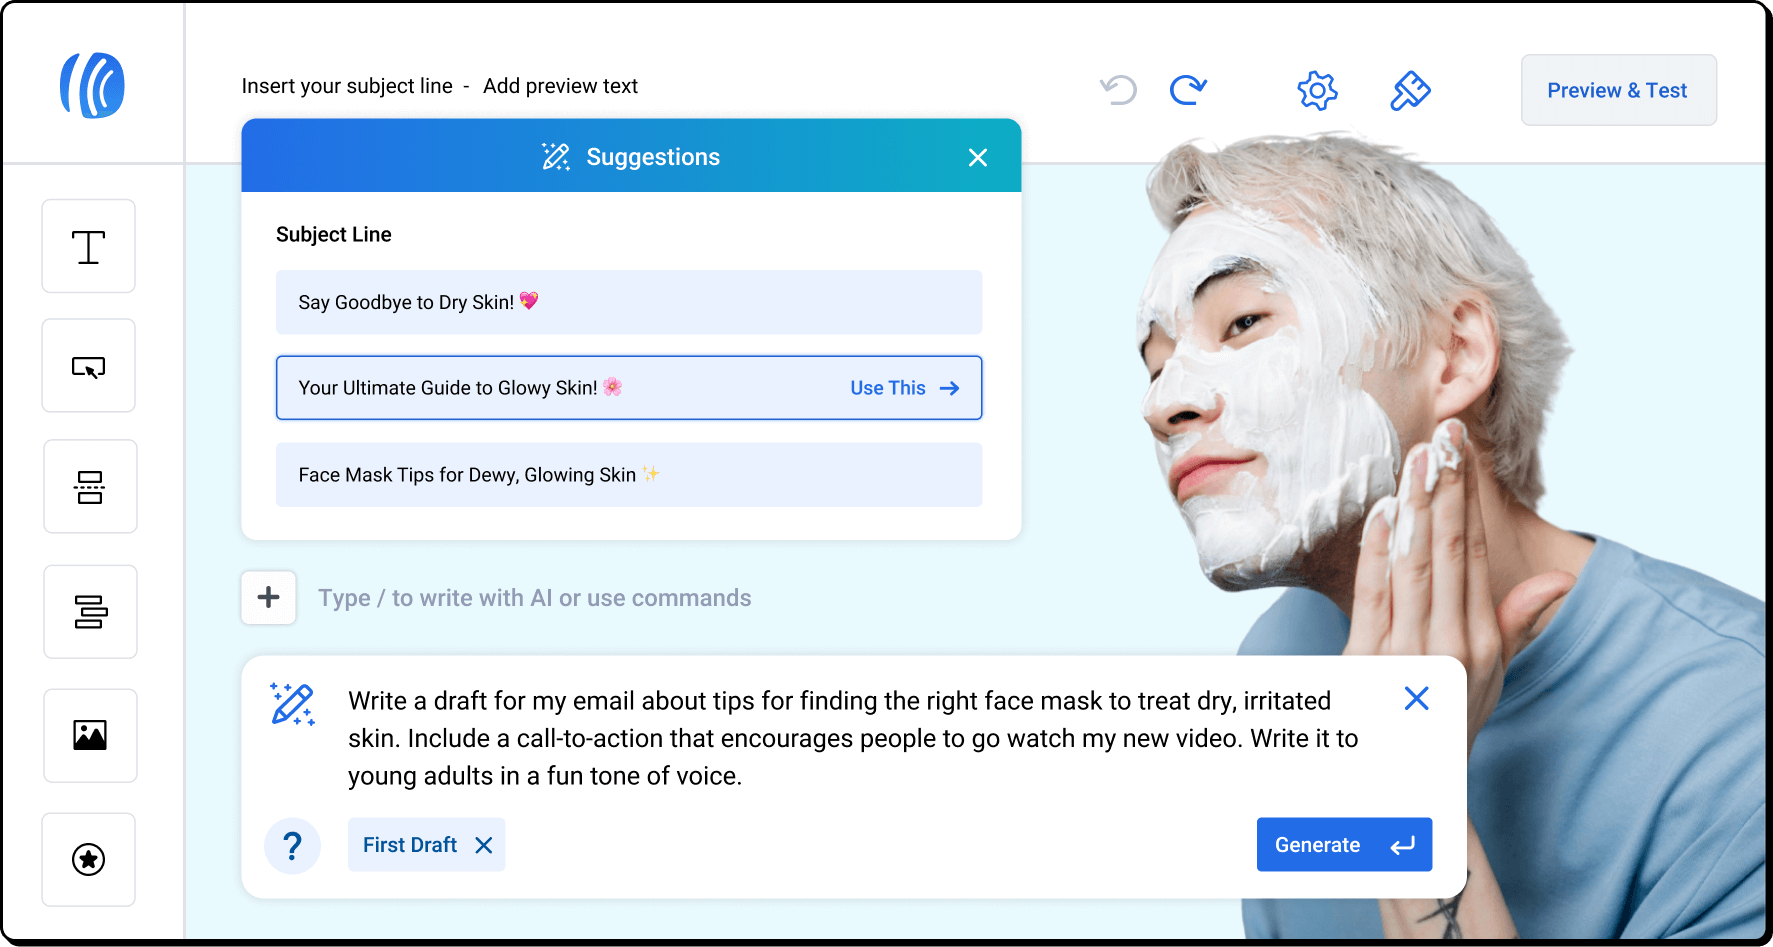 AWeber message editor with AI prompt asking AI for a first draft of a newsletter about finding the right face mask and asking AI for subject line suggestions.